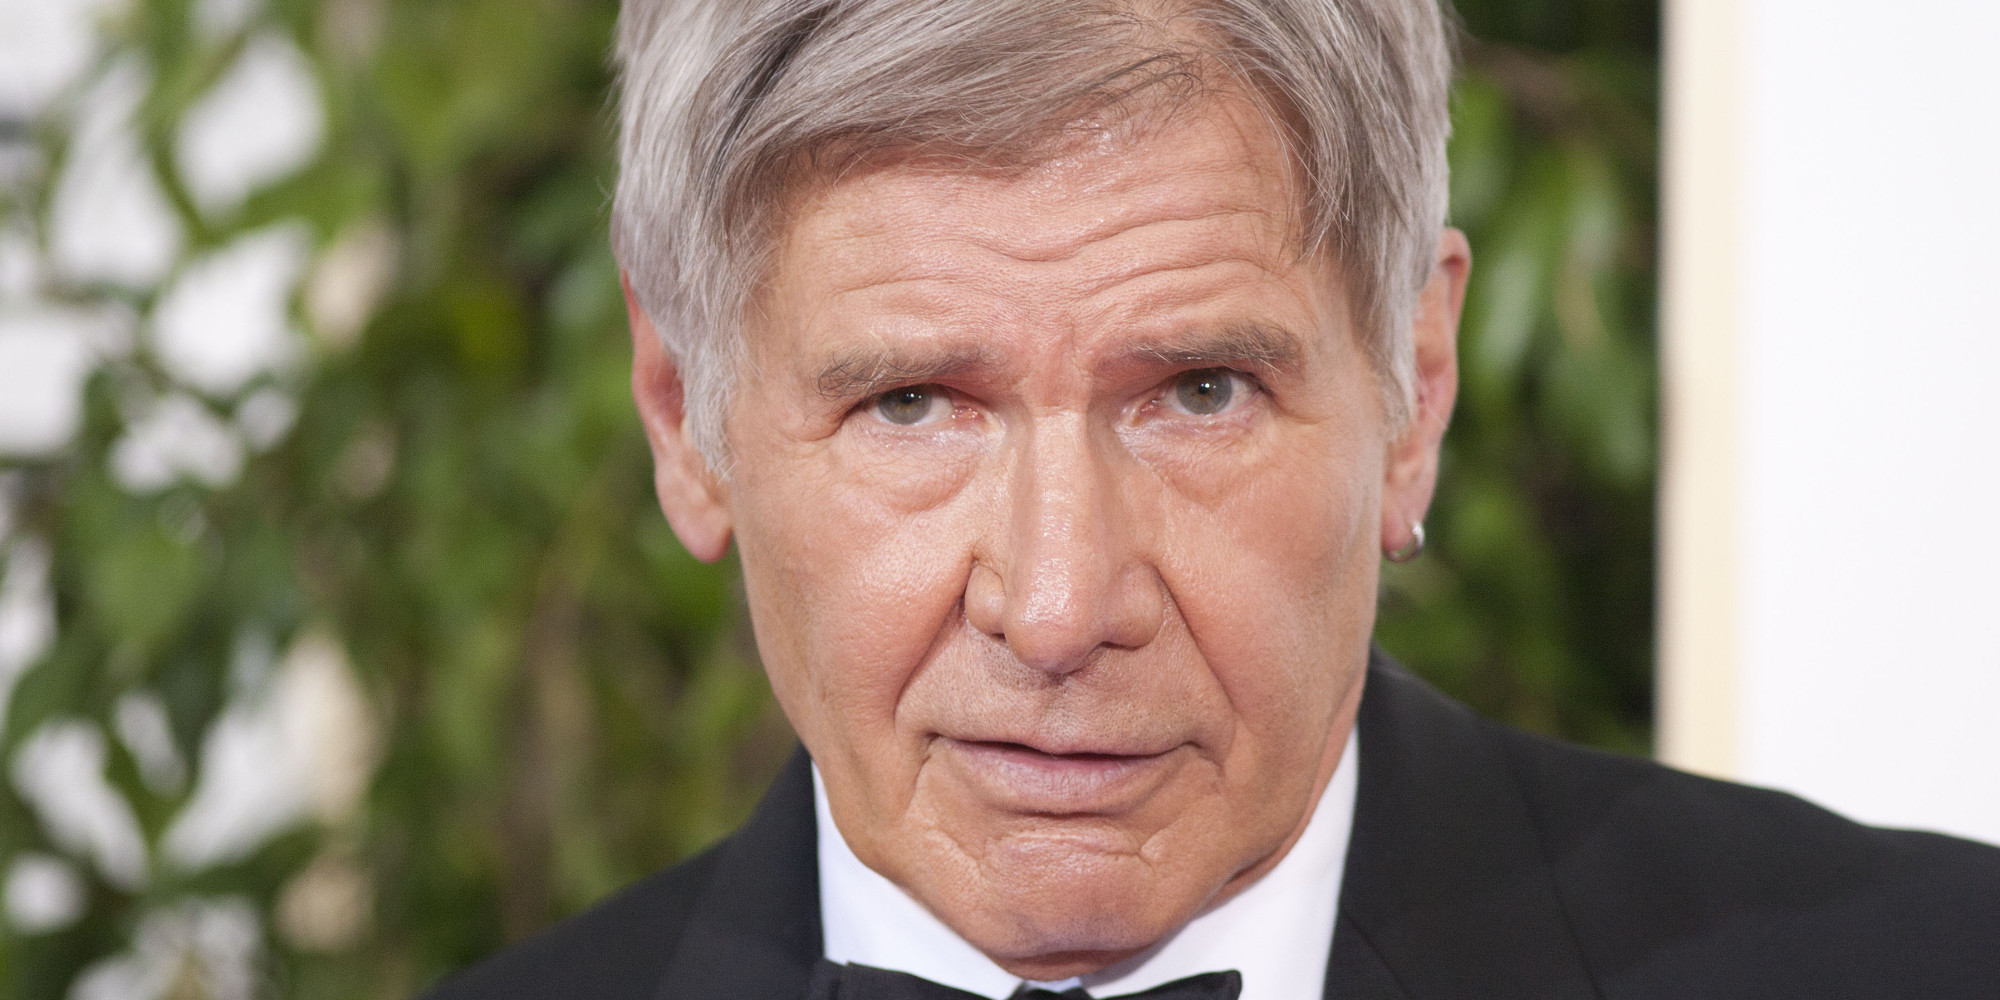 Harrison ford face #4